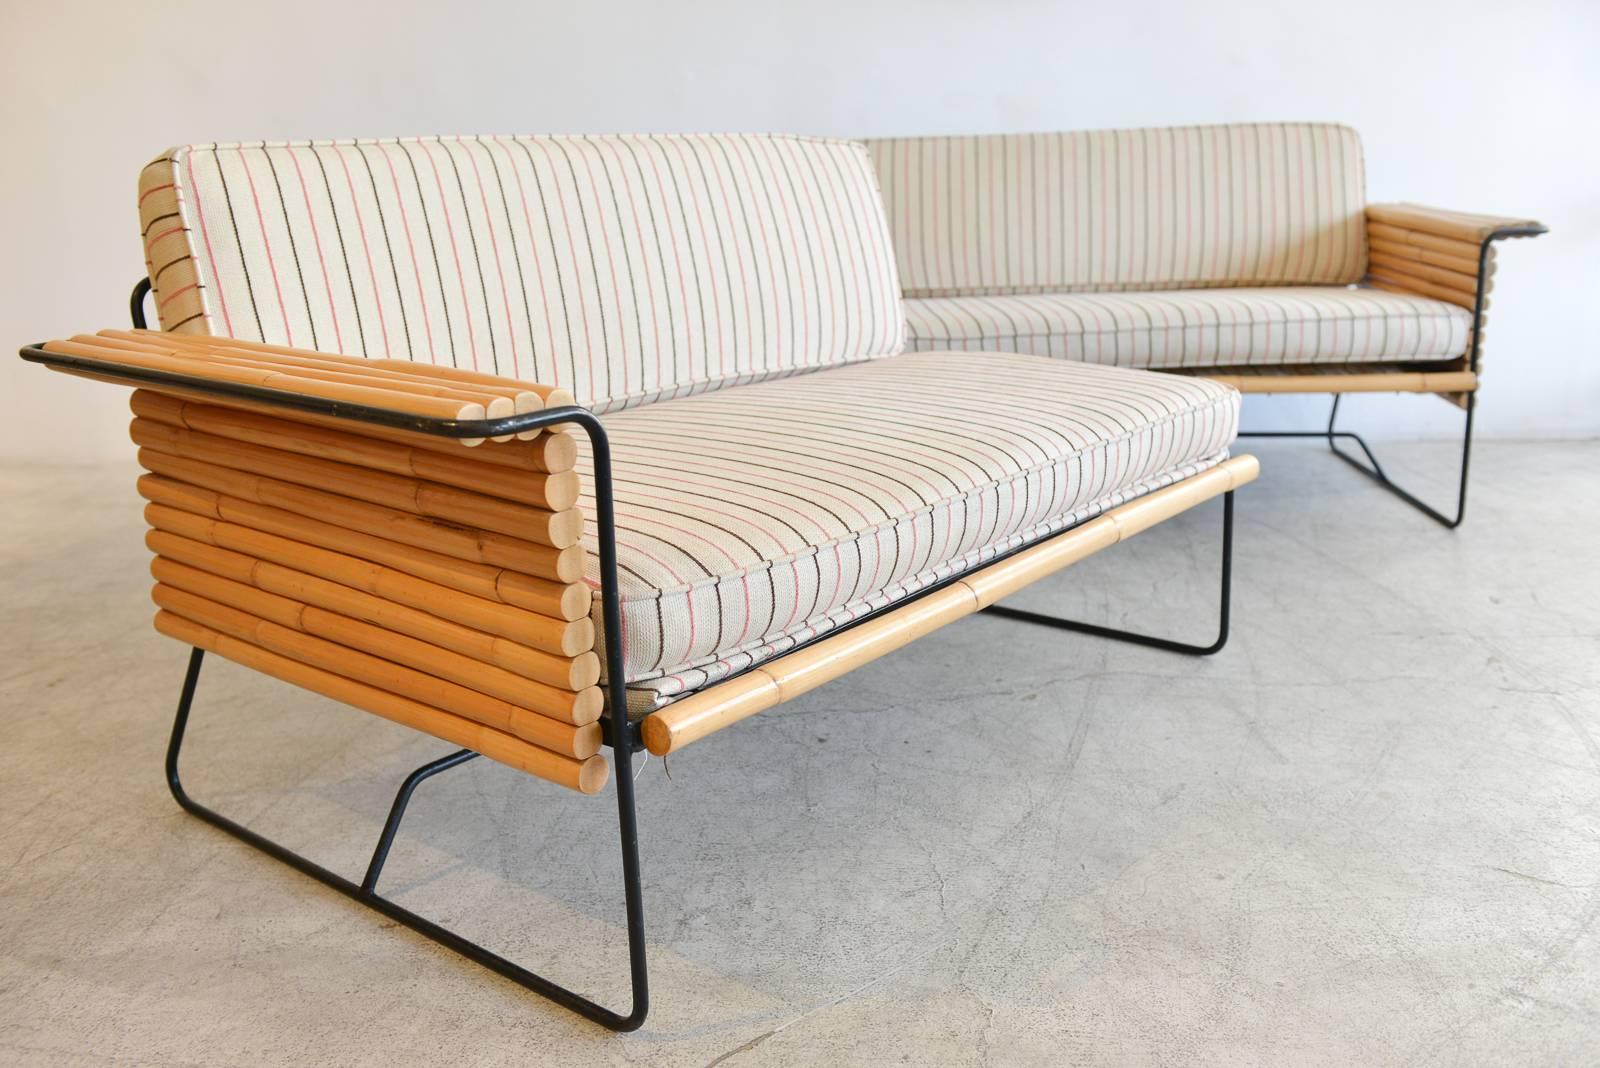 Rattan and wrought iron seating ensemble by Herb and Shirley Ritts for Ritts Co., Los Angeles, circa 1955. Full set included two-piece settee or loveseat, lounge chair and matching side table. Made of heavy wrought iron with rattan accents, this is